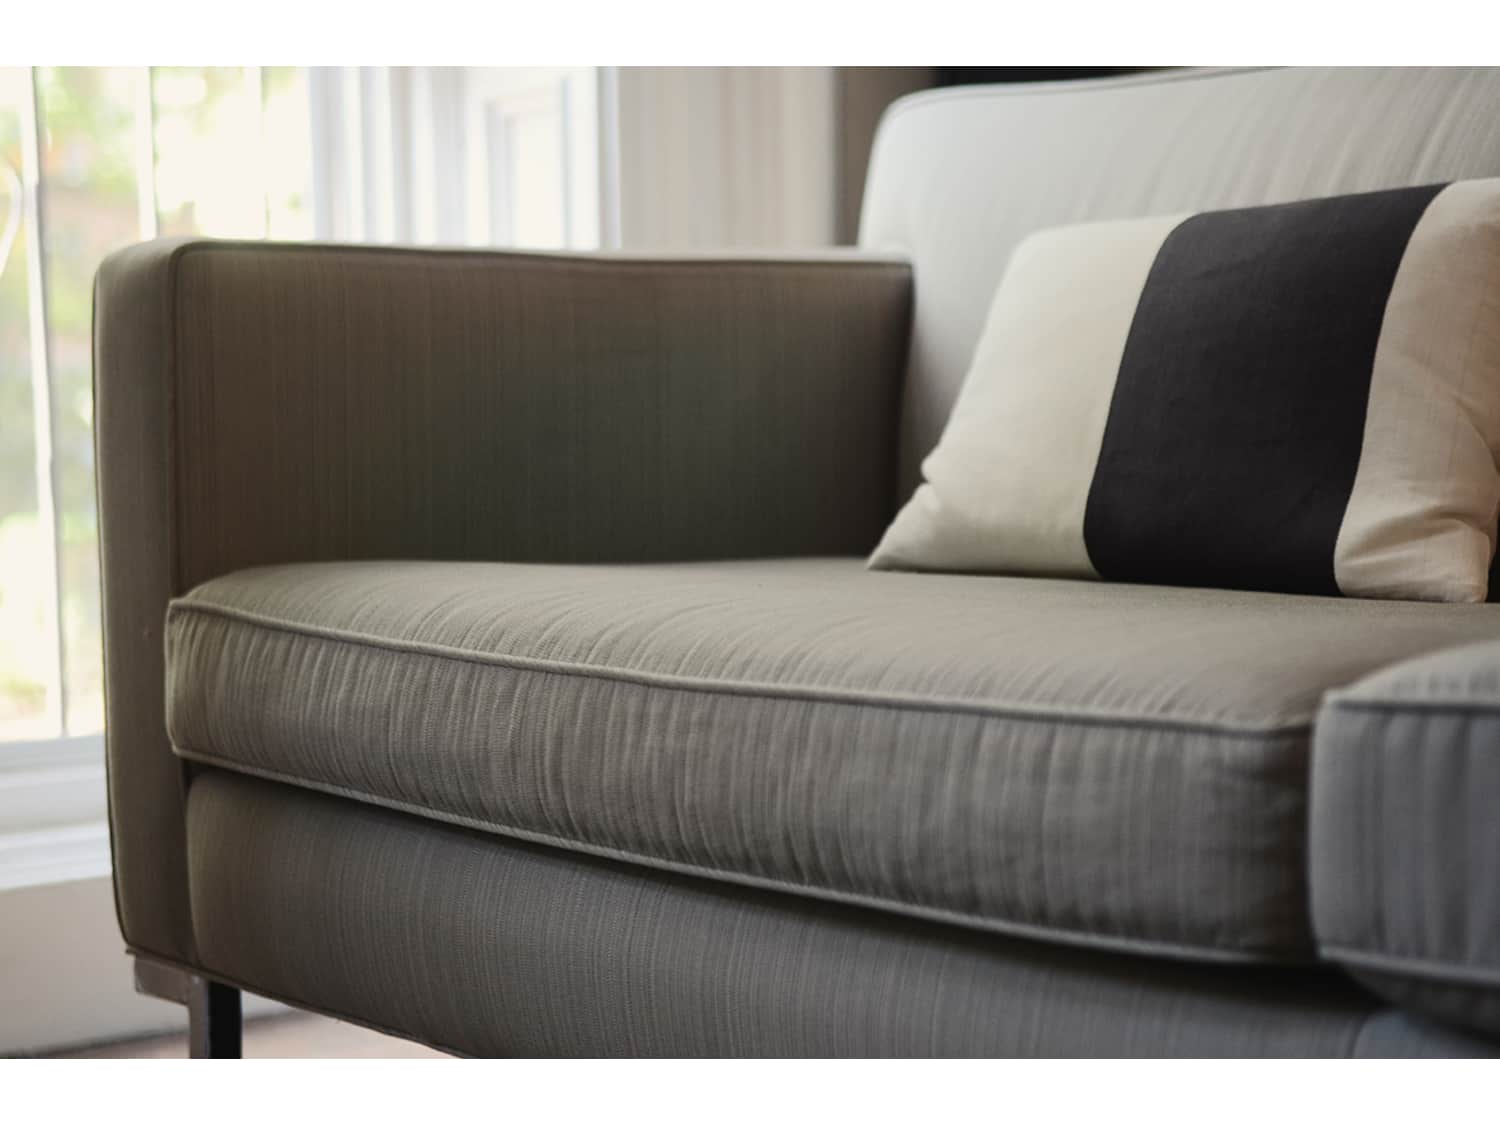 DWR Theatre Sofa in gray tweed fabric Apartment Therapy